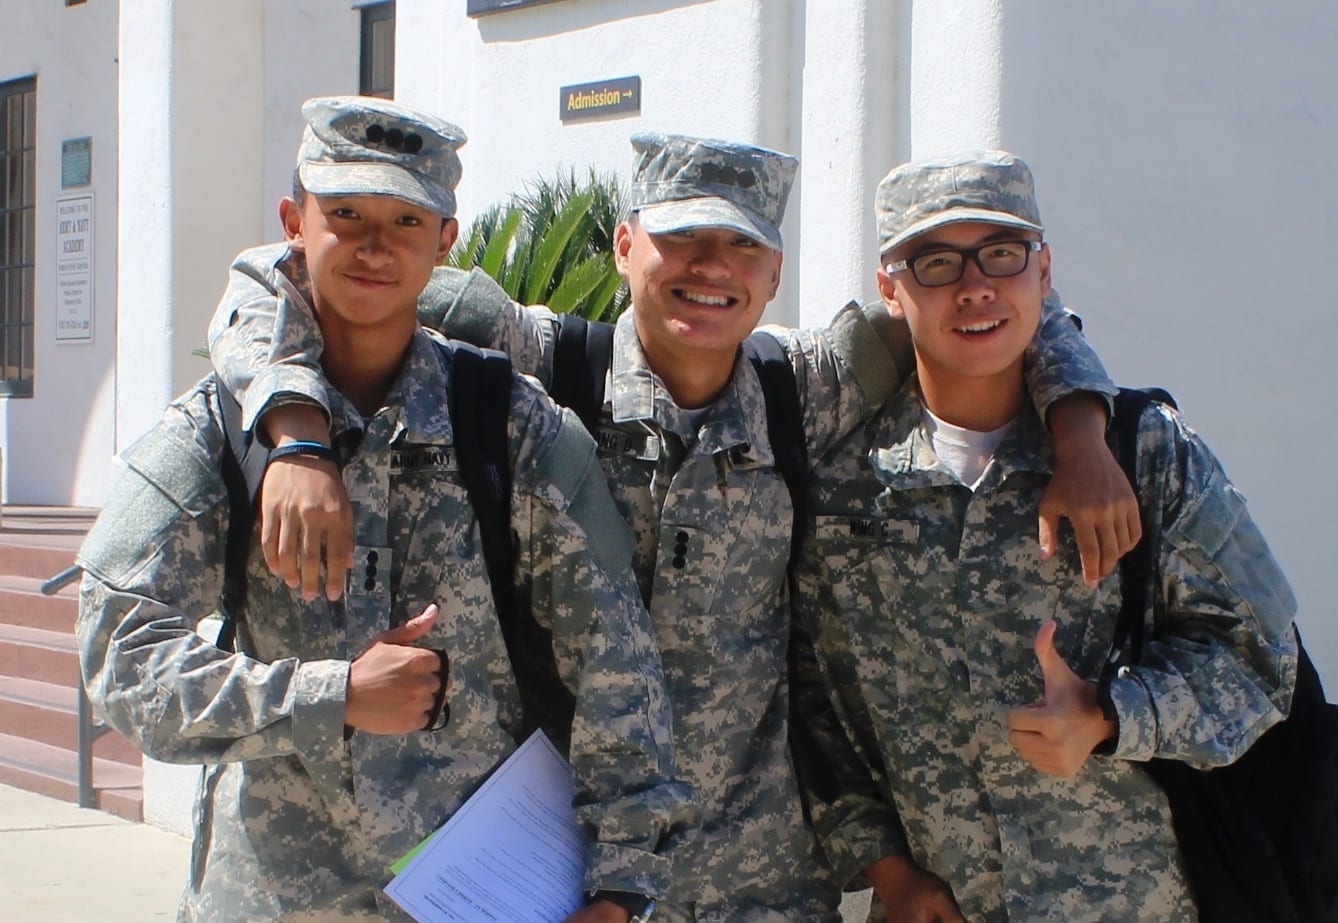 jrotc builds character and leadership